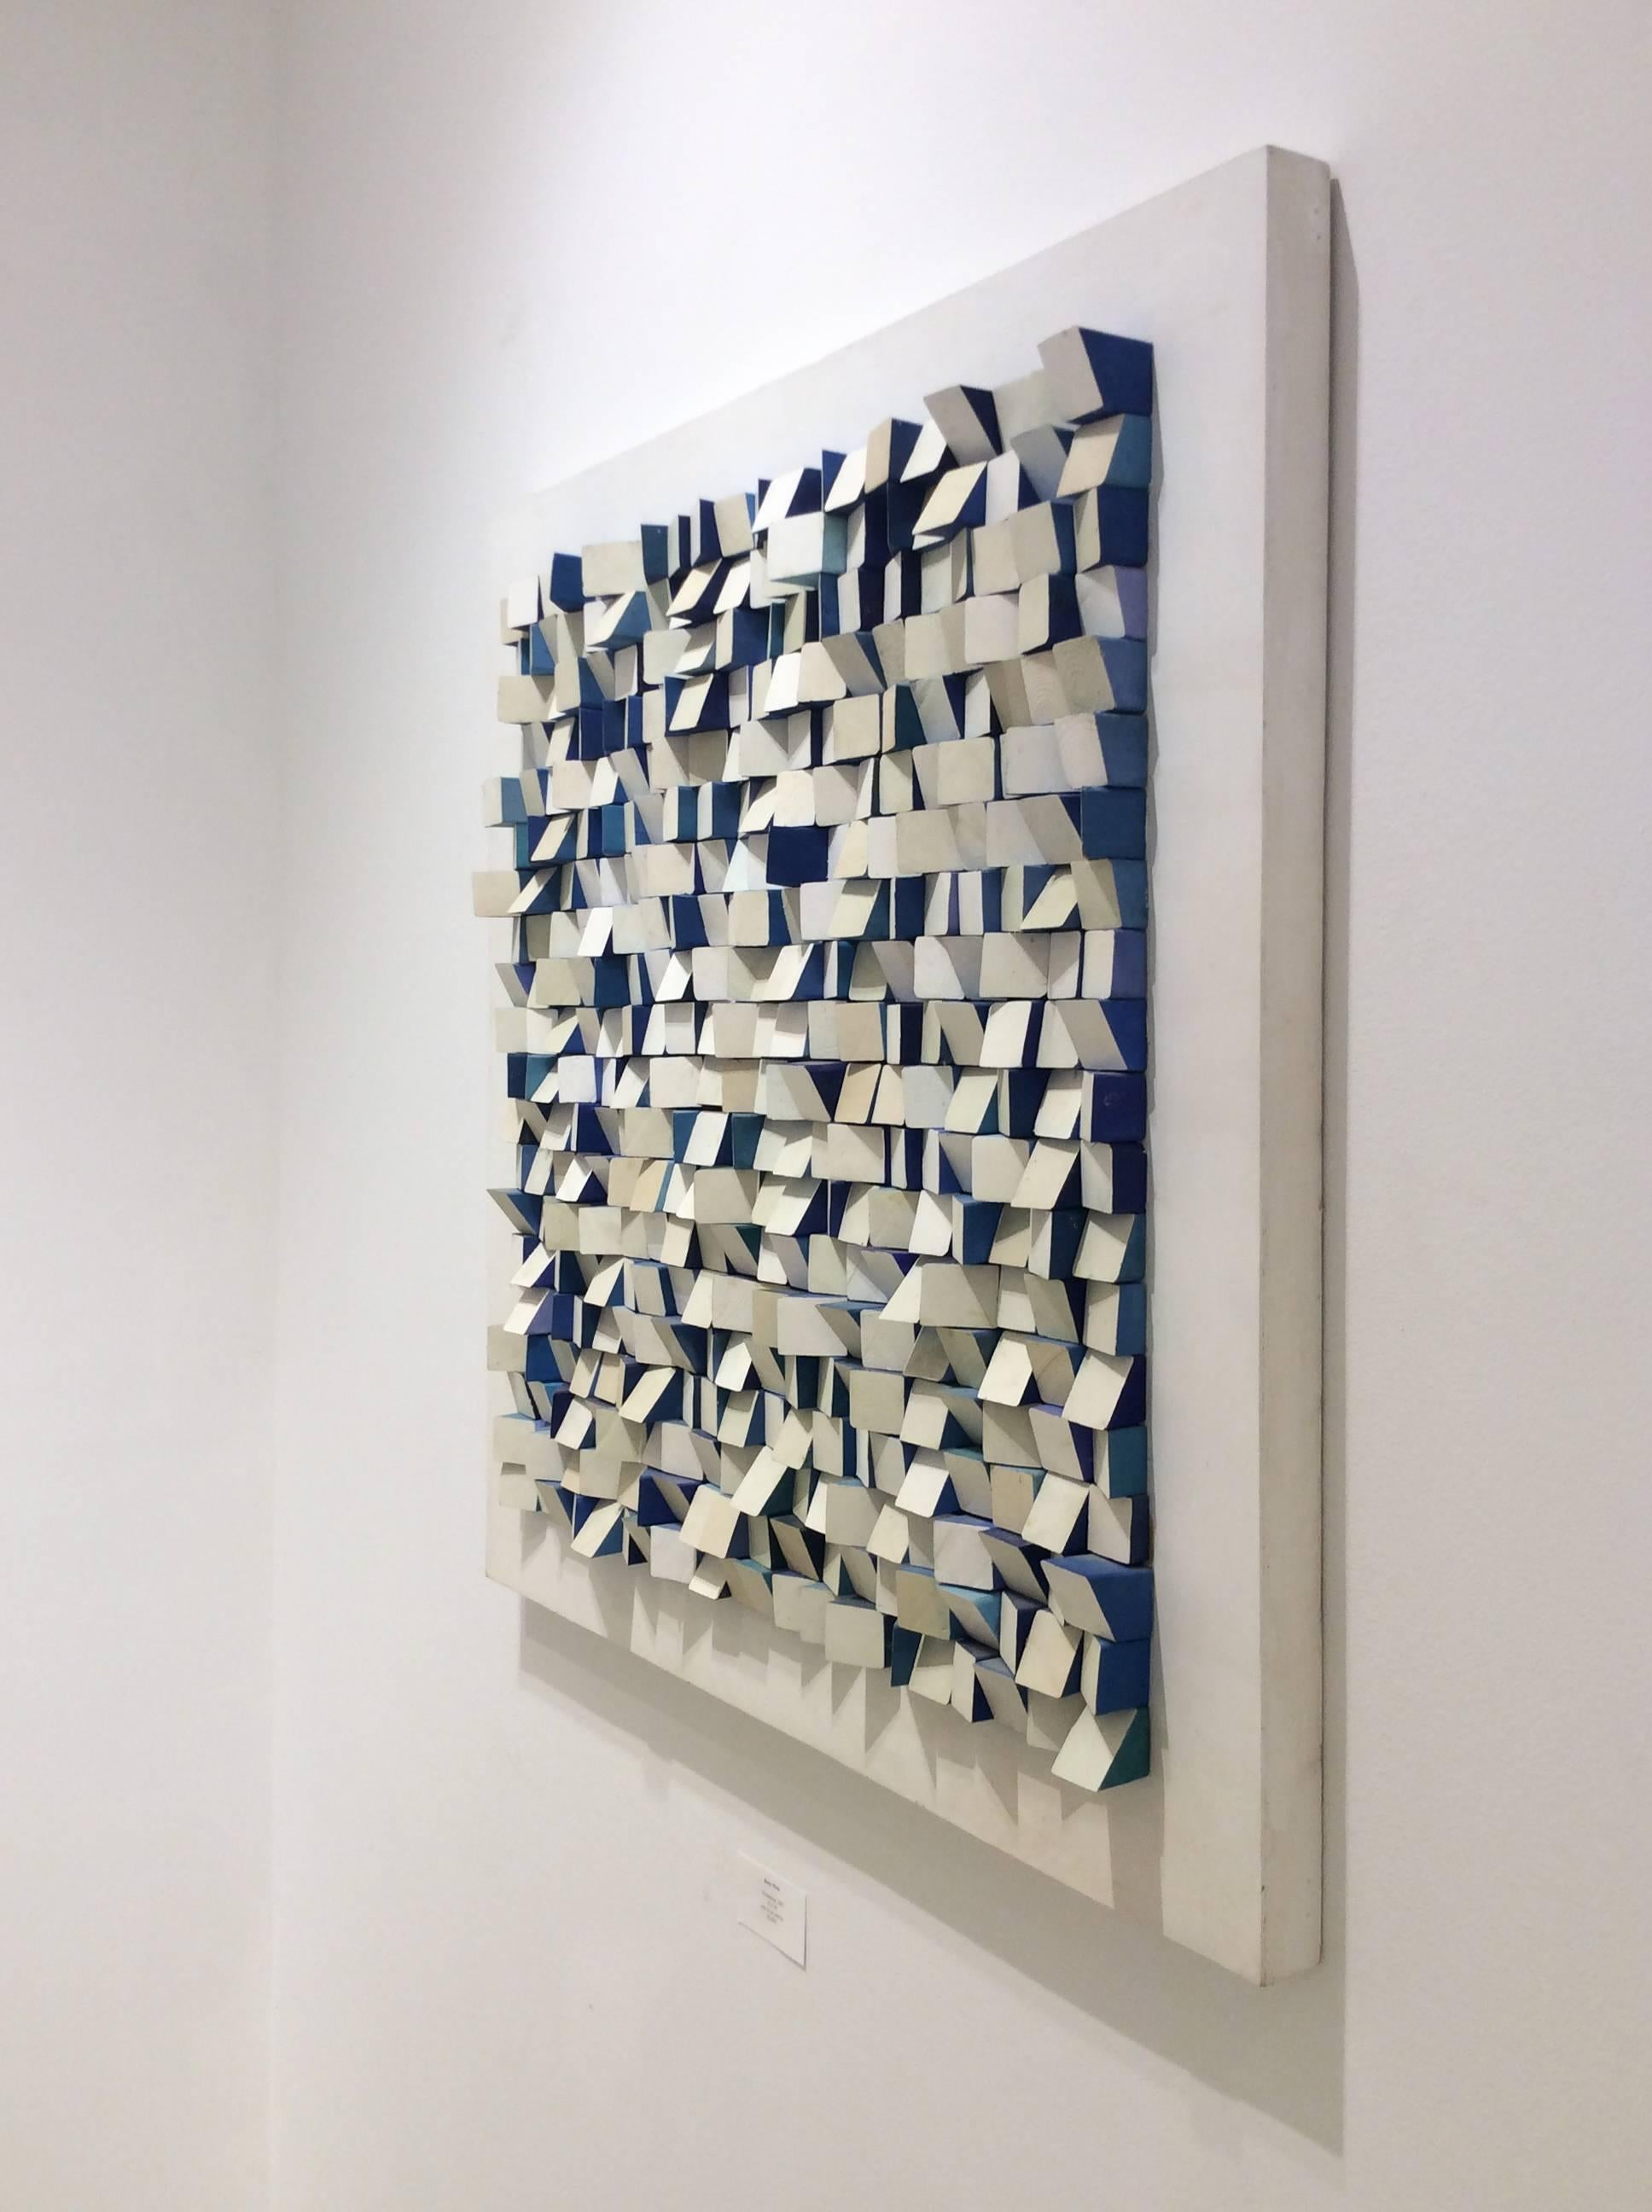 Peek a Blue (Modern Abstract, Square 3-D Wall Sculpture in Blue & White) - Brown Abstract Sculpture by Stephen Walling